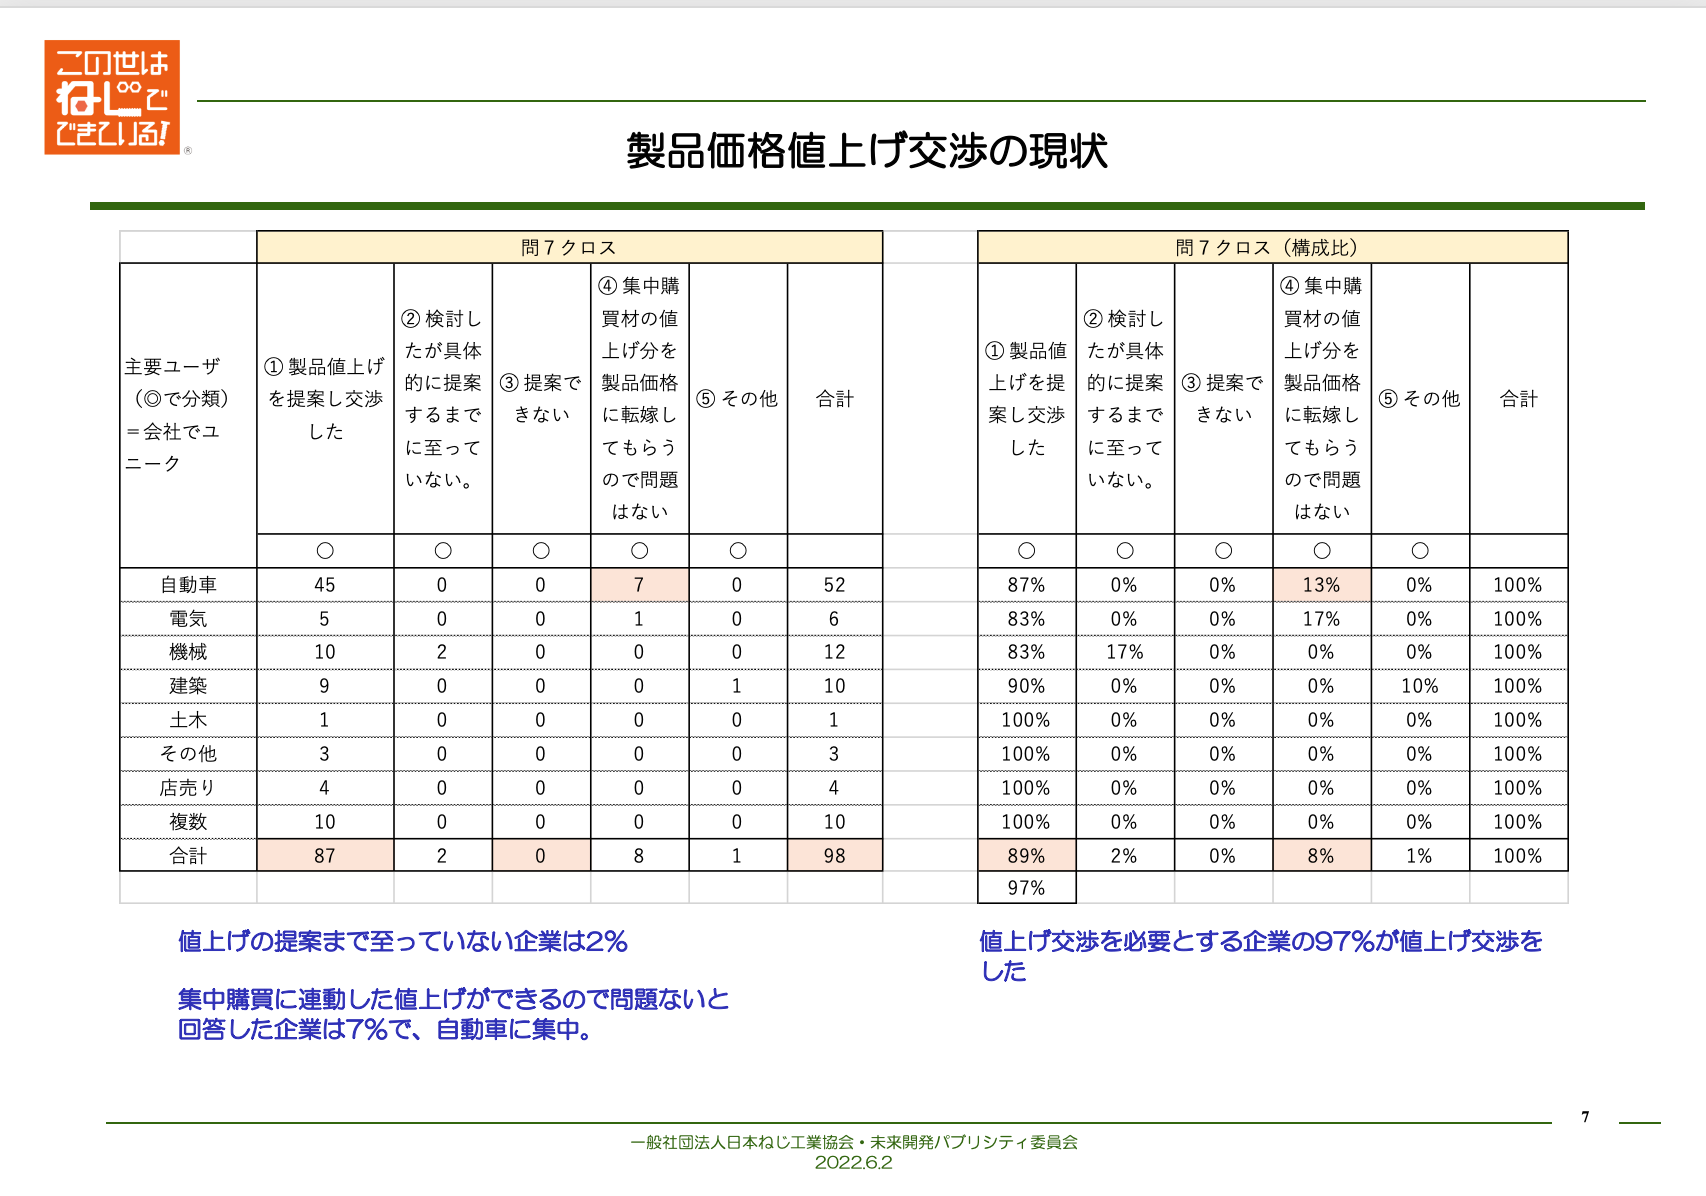 7：Survey analysis results 2022-06-10 11.30.25.png